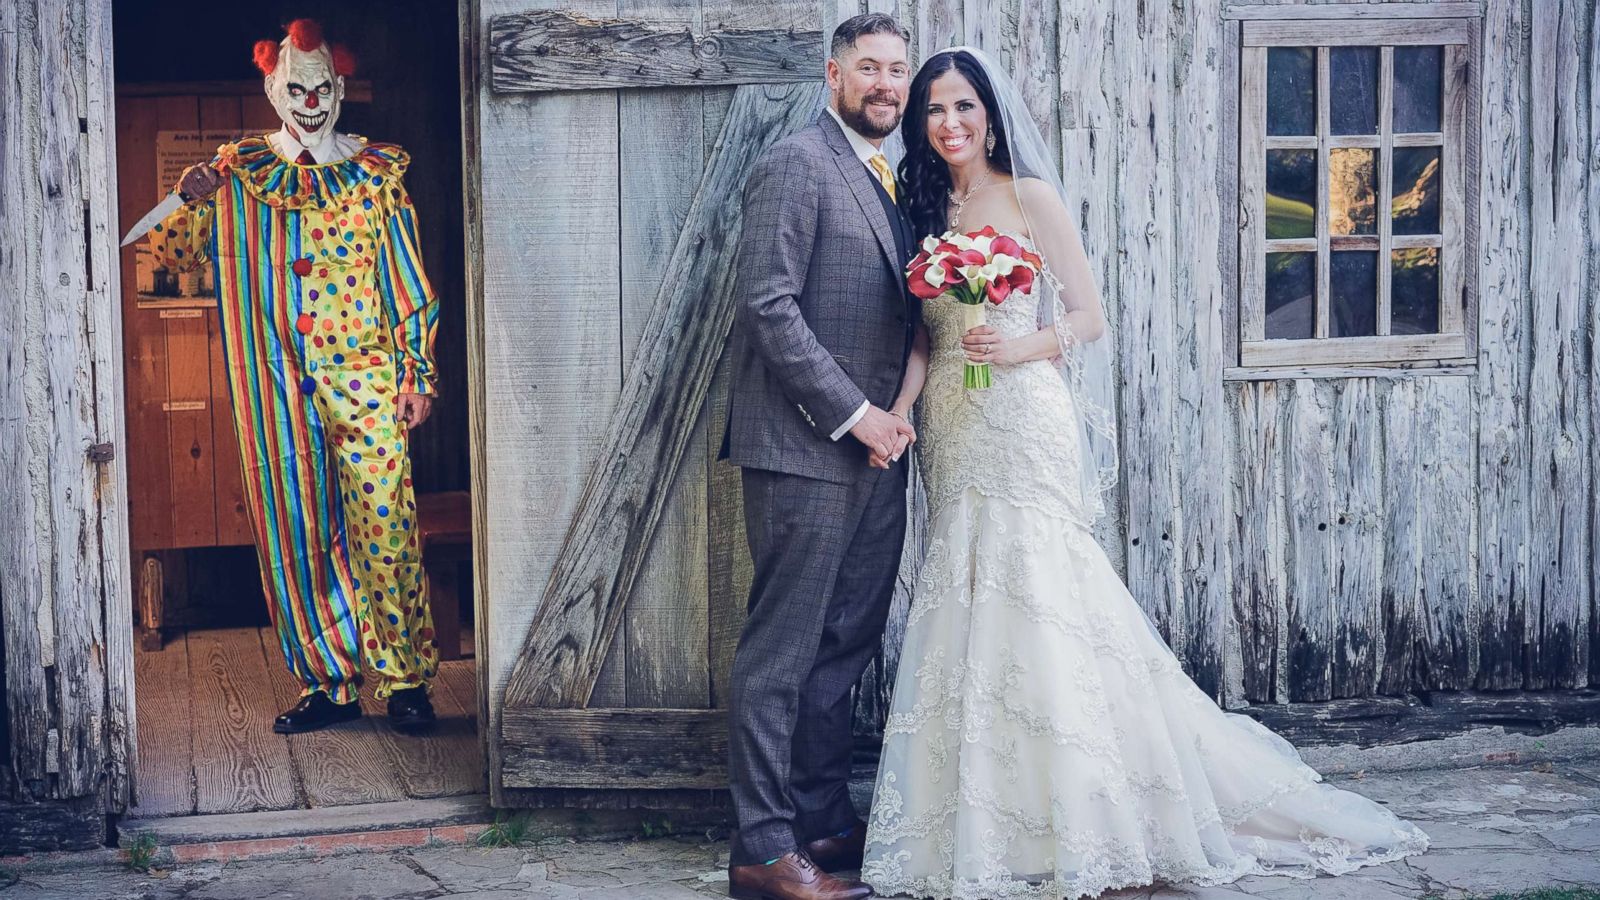 PHOTO: Bride Manda Alexander was surprised by her husband Vincent with this "killer clown"-themed wedding photo.